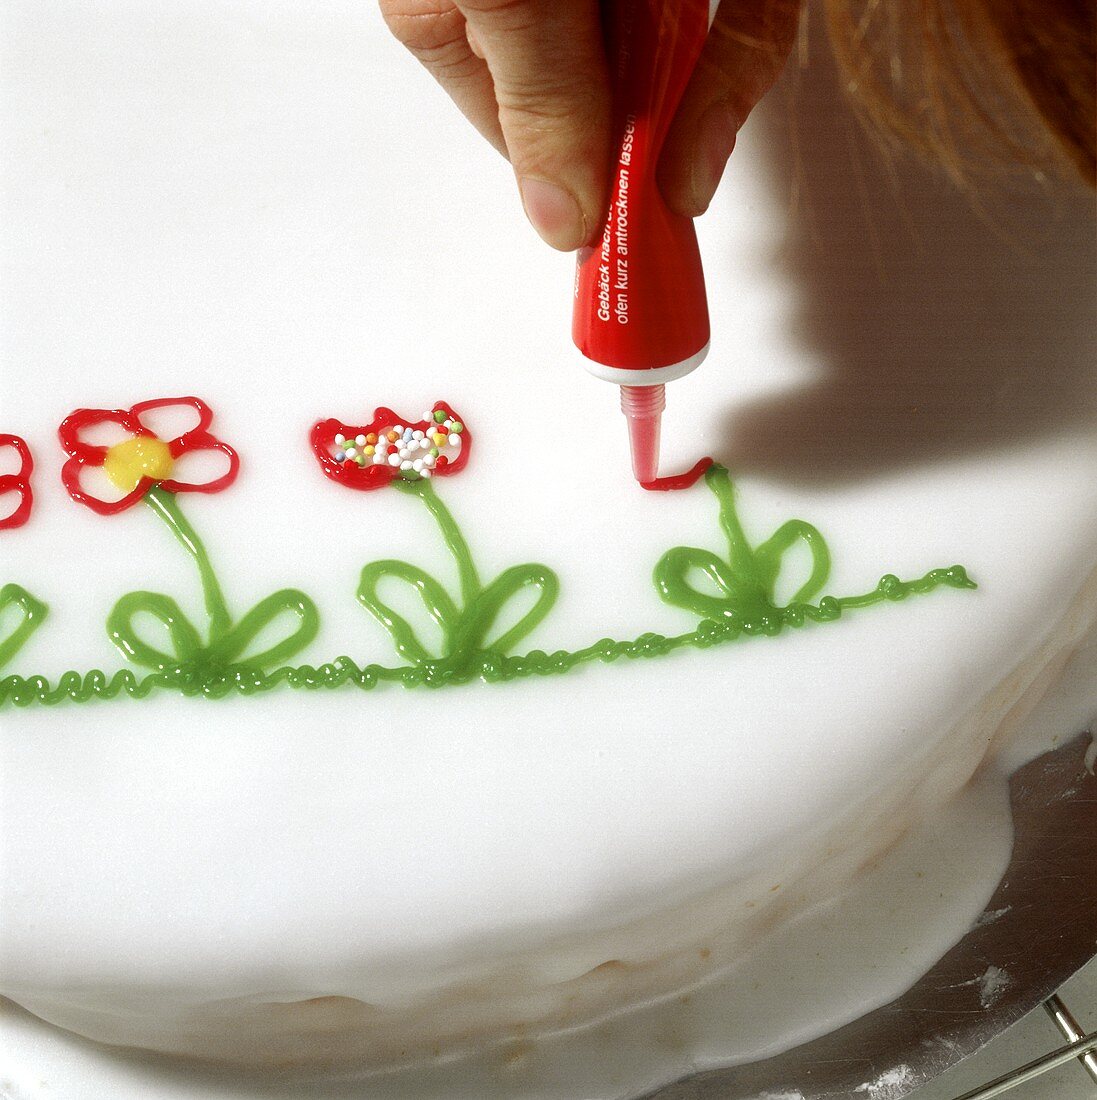 Decorating a cake with flowers (icing from a tube)